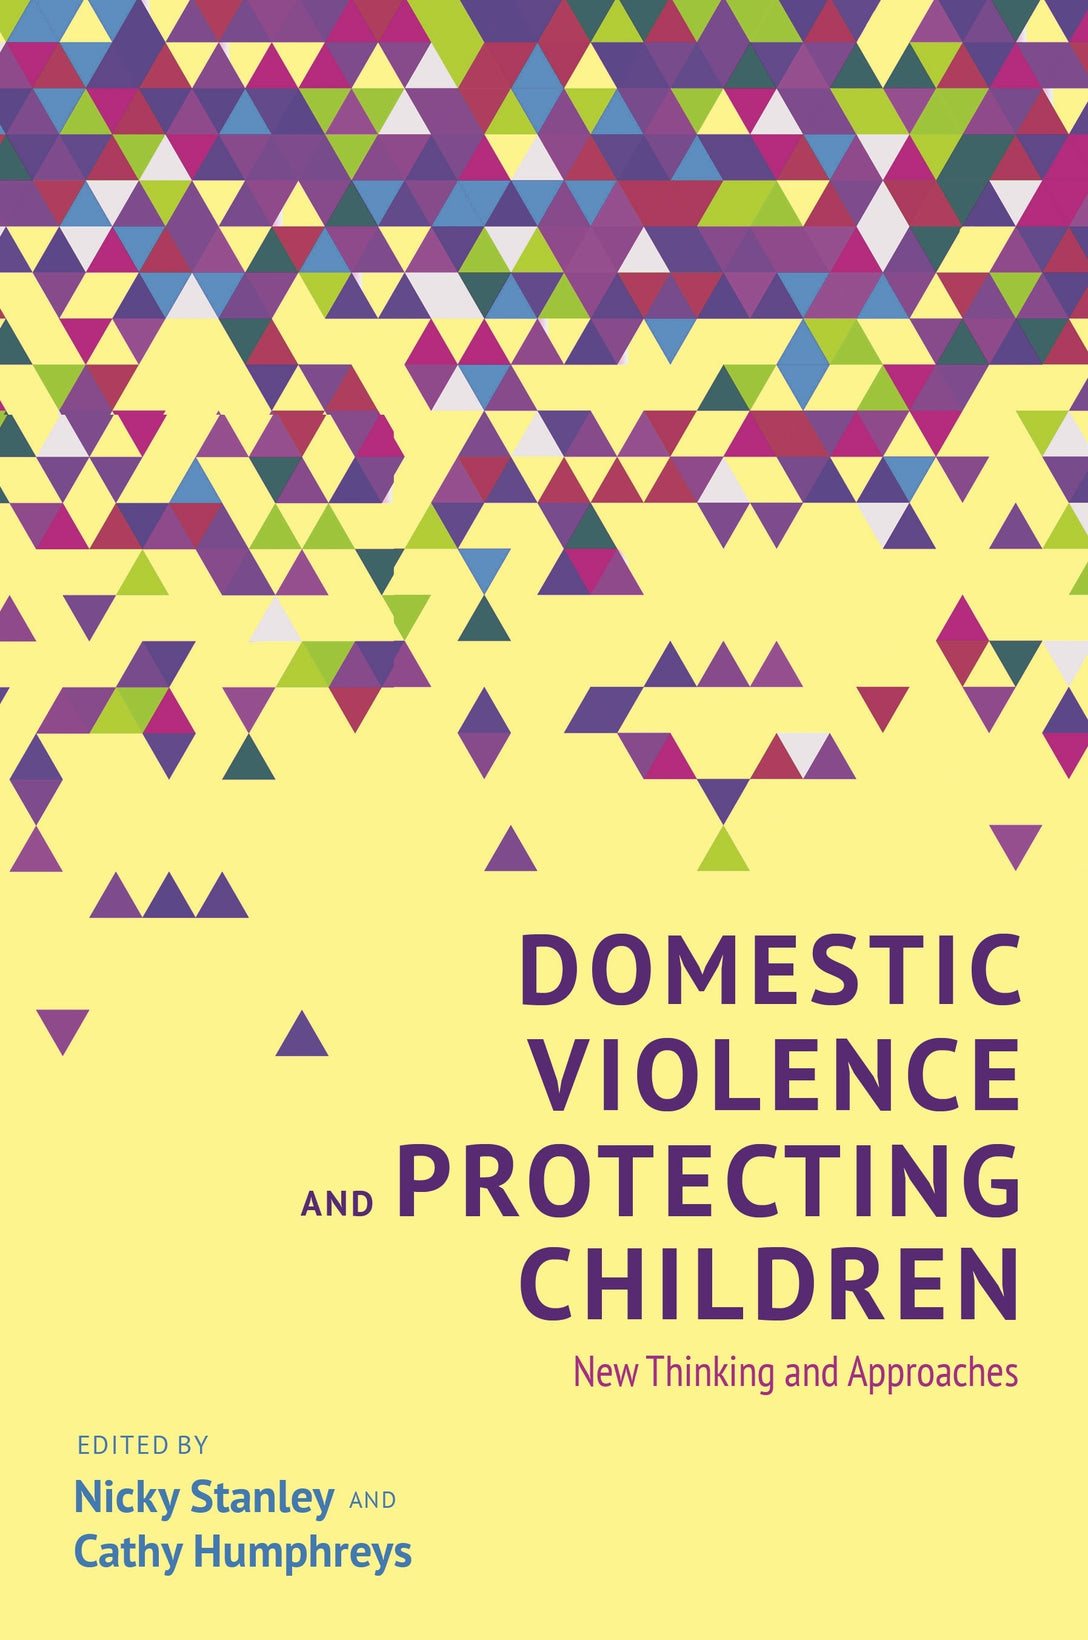 Domestic Violence and Protecting Children by No Author Listed, Nicky Stanley, Cathy Humphreys